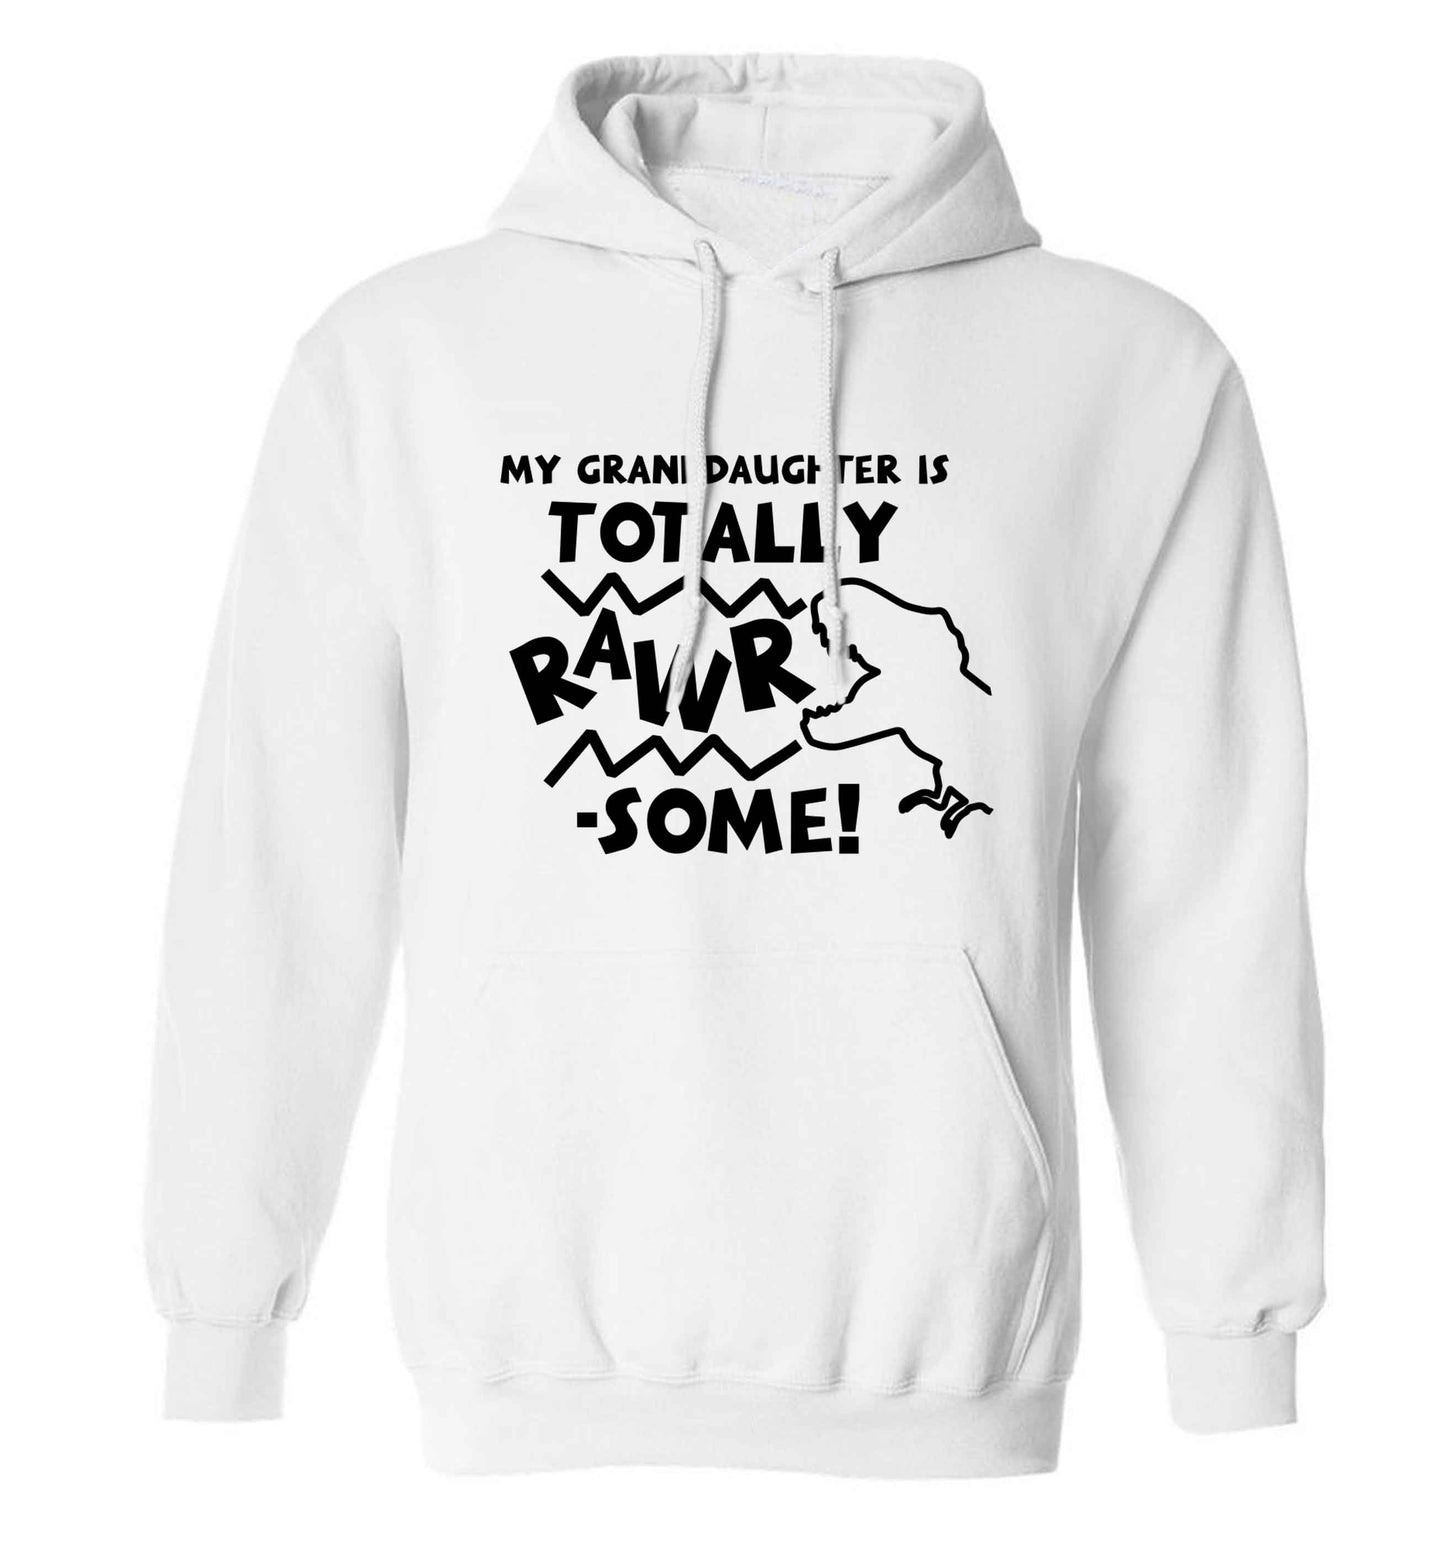 My granddaughter is totally rawrsome adults unisex white hoodie 2XL